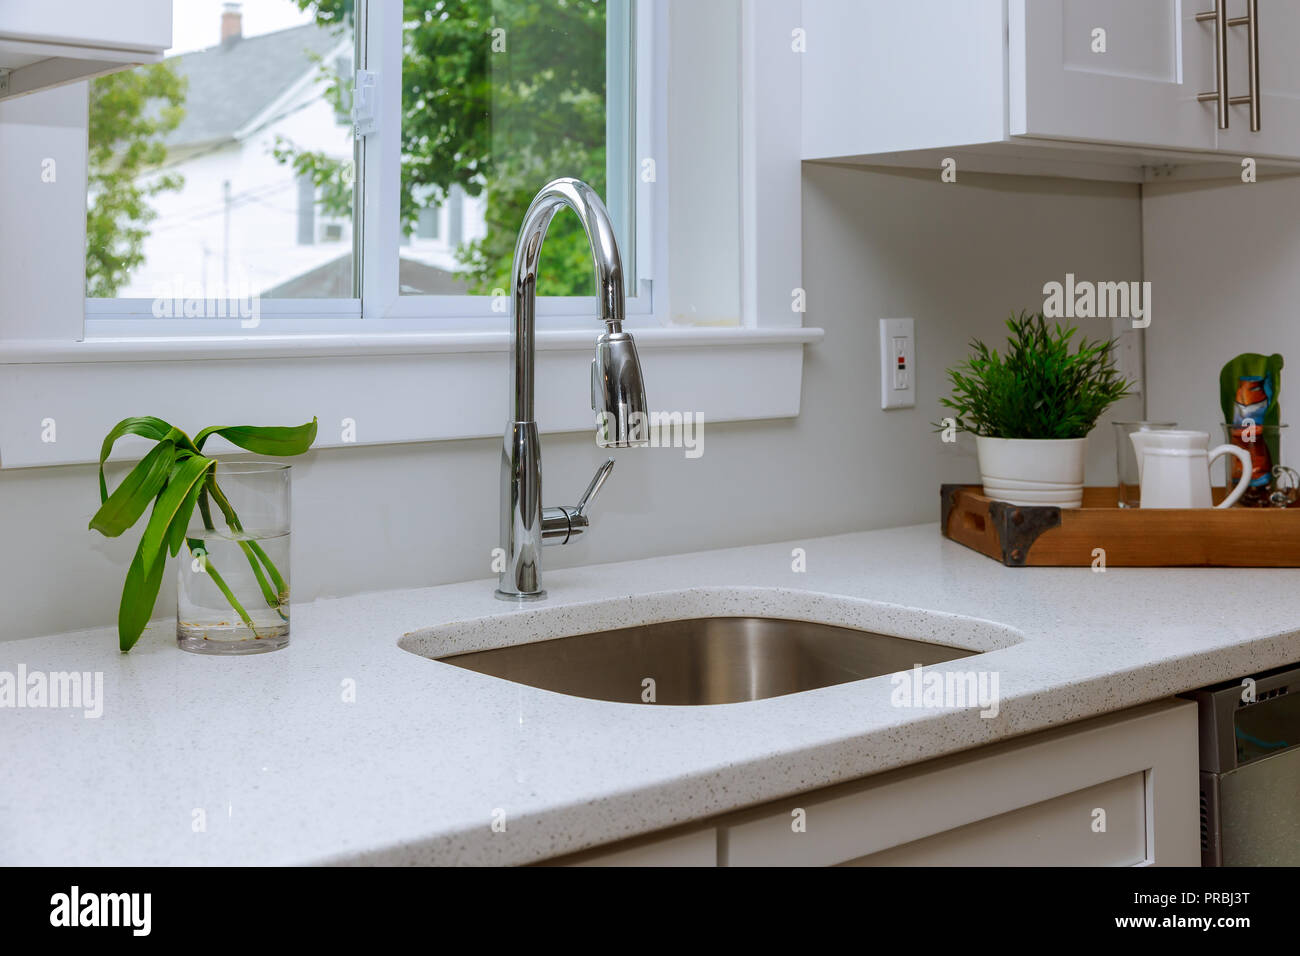 Beautiful modern kitchen interior with sink, cabinets, stainless steel in New Luxury Home Stock Photo